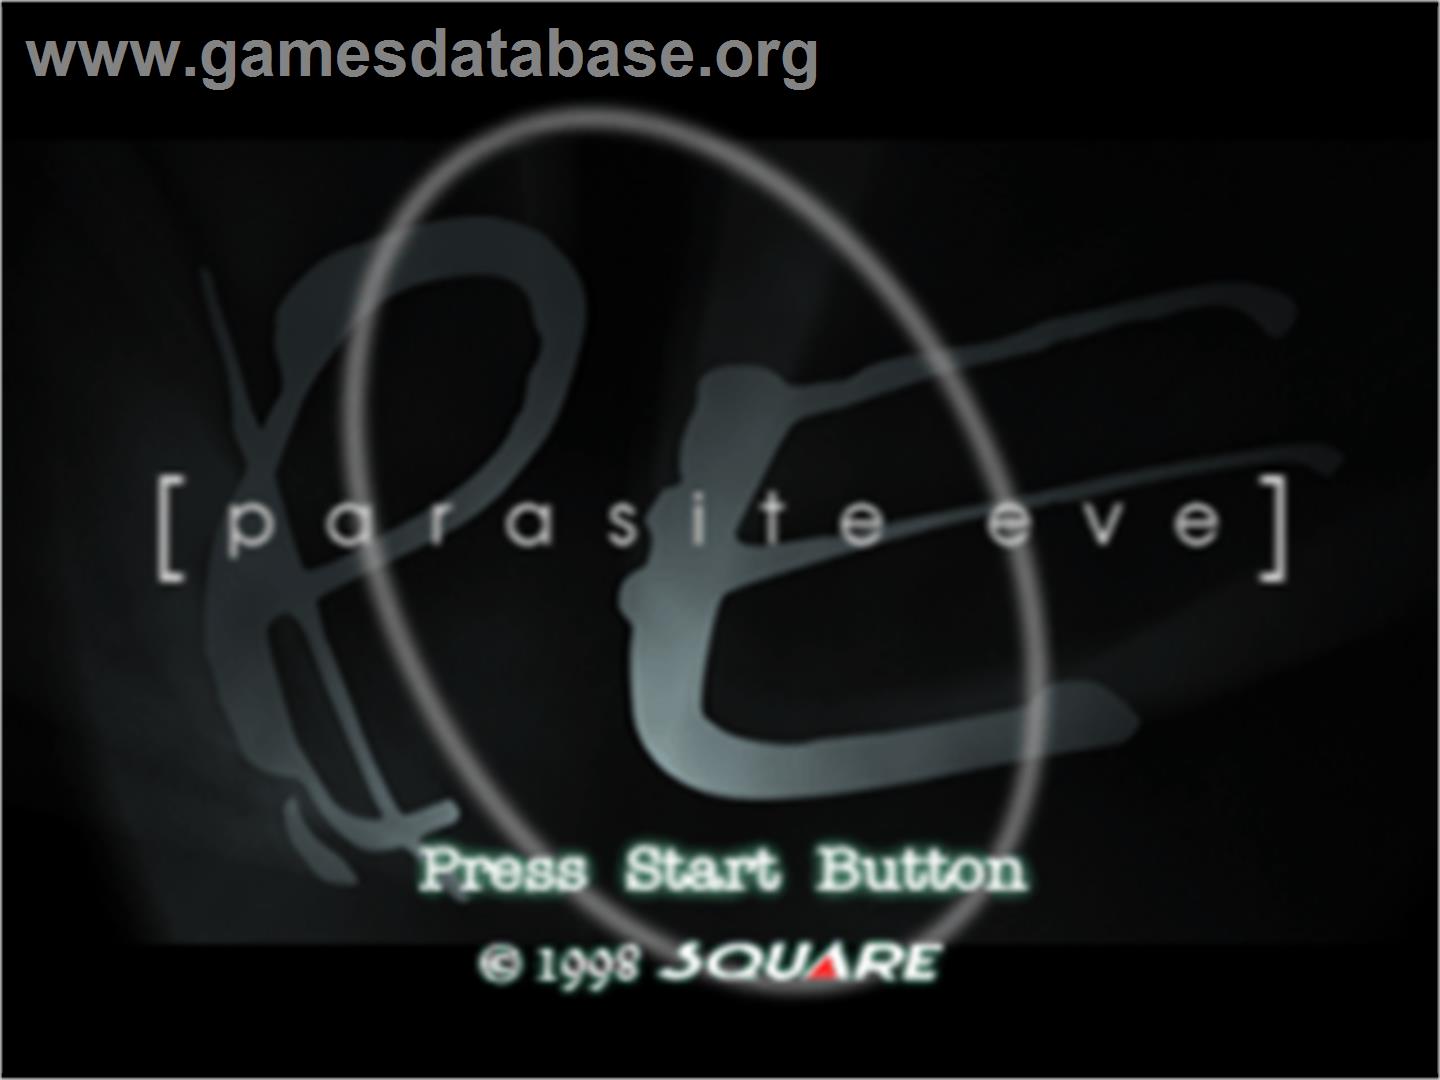 Parasite Eve - Sony Playstation - Artwork - Title Screen